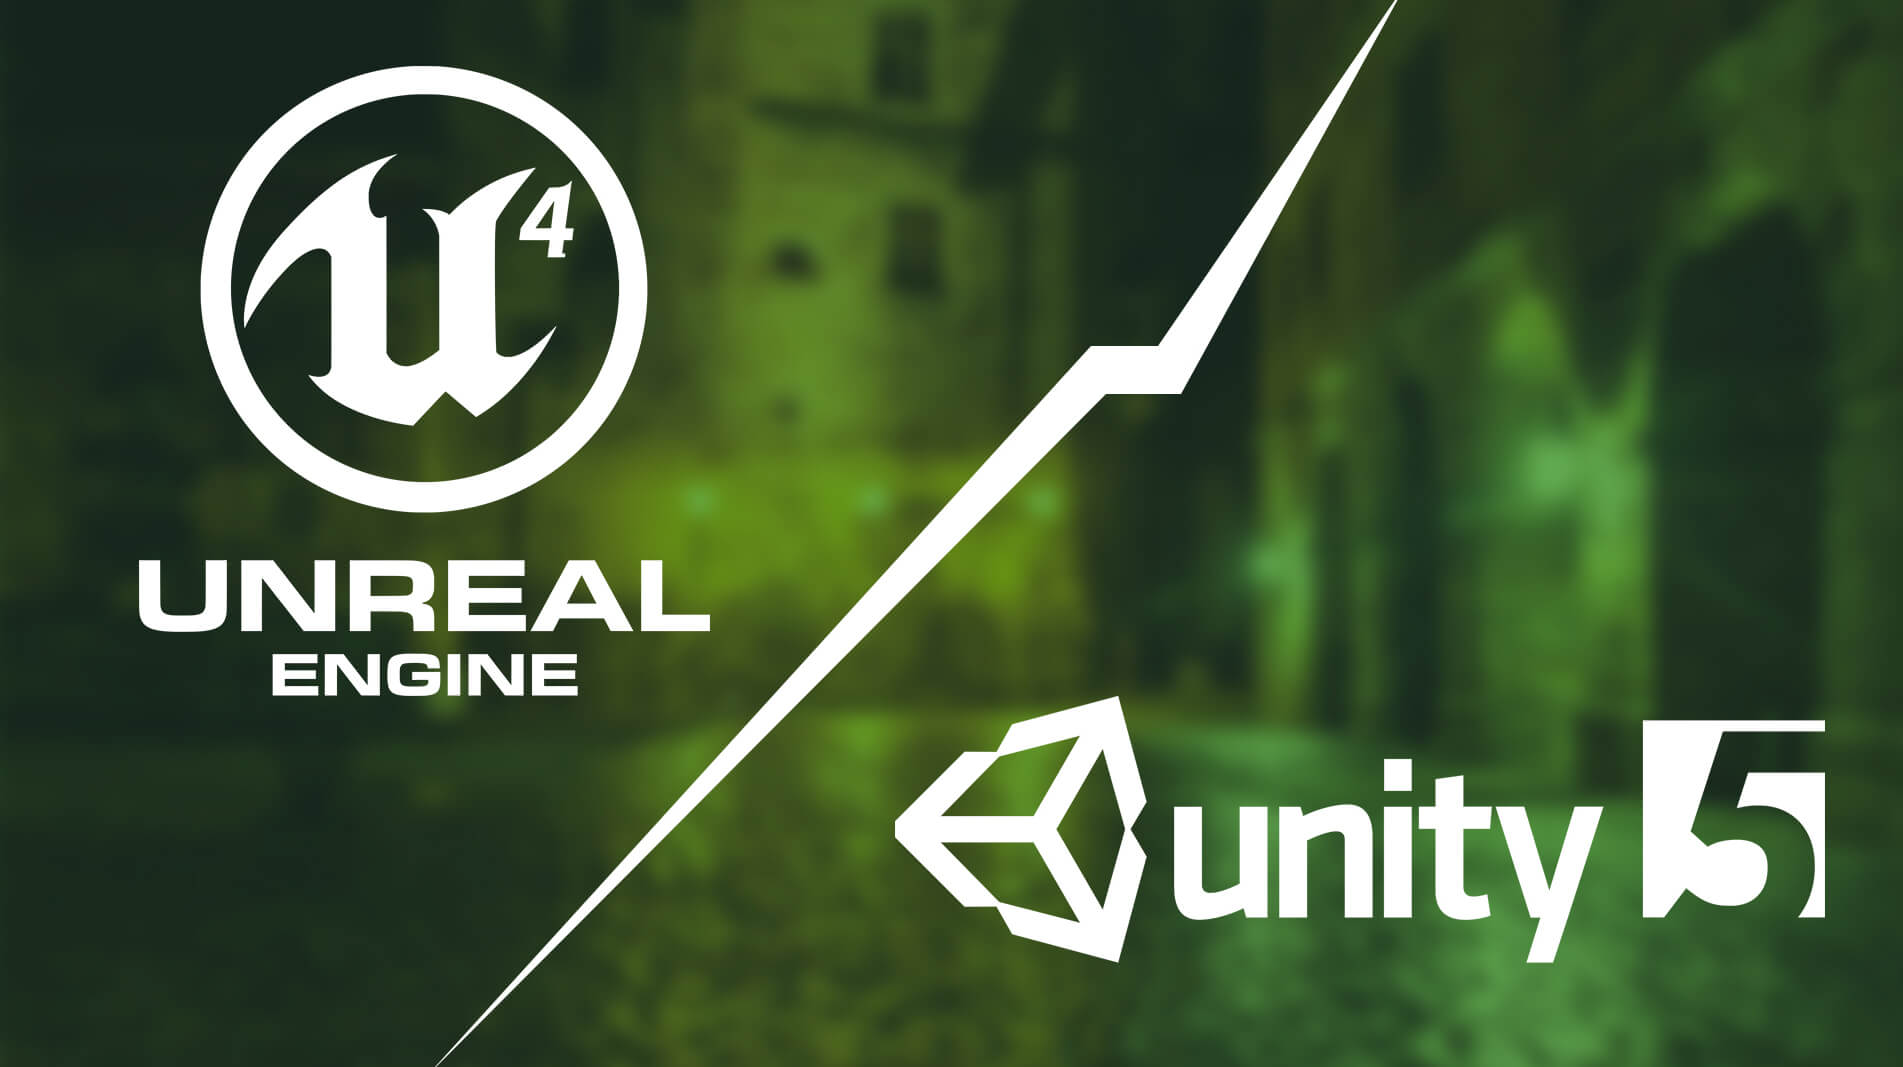 Unreal Engine Vs Unity 3d Games Development What To Choose - program any script for your roblox game by unrealdeveloper